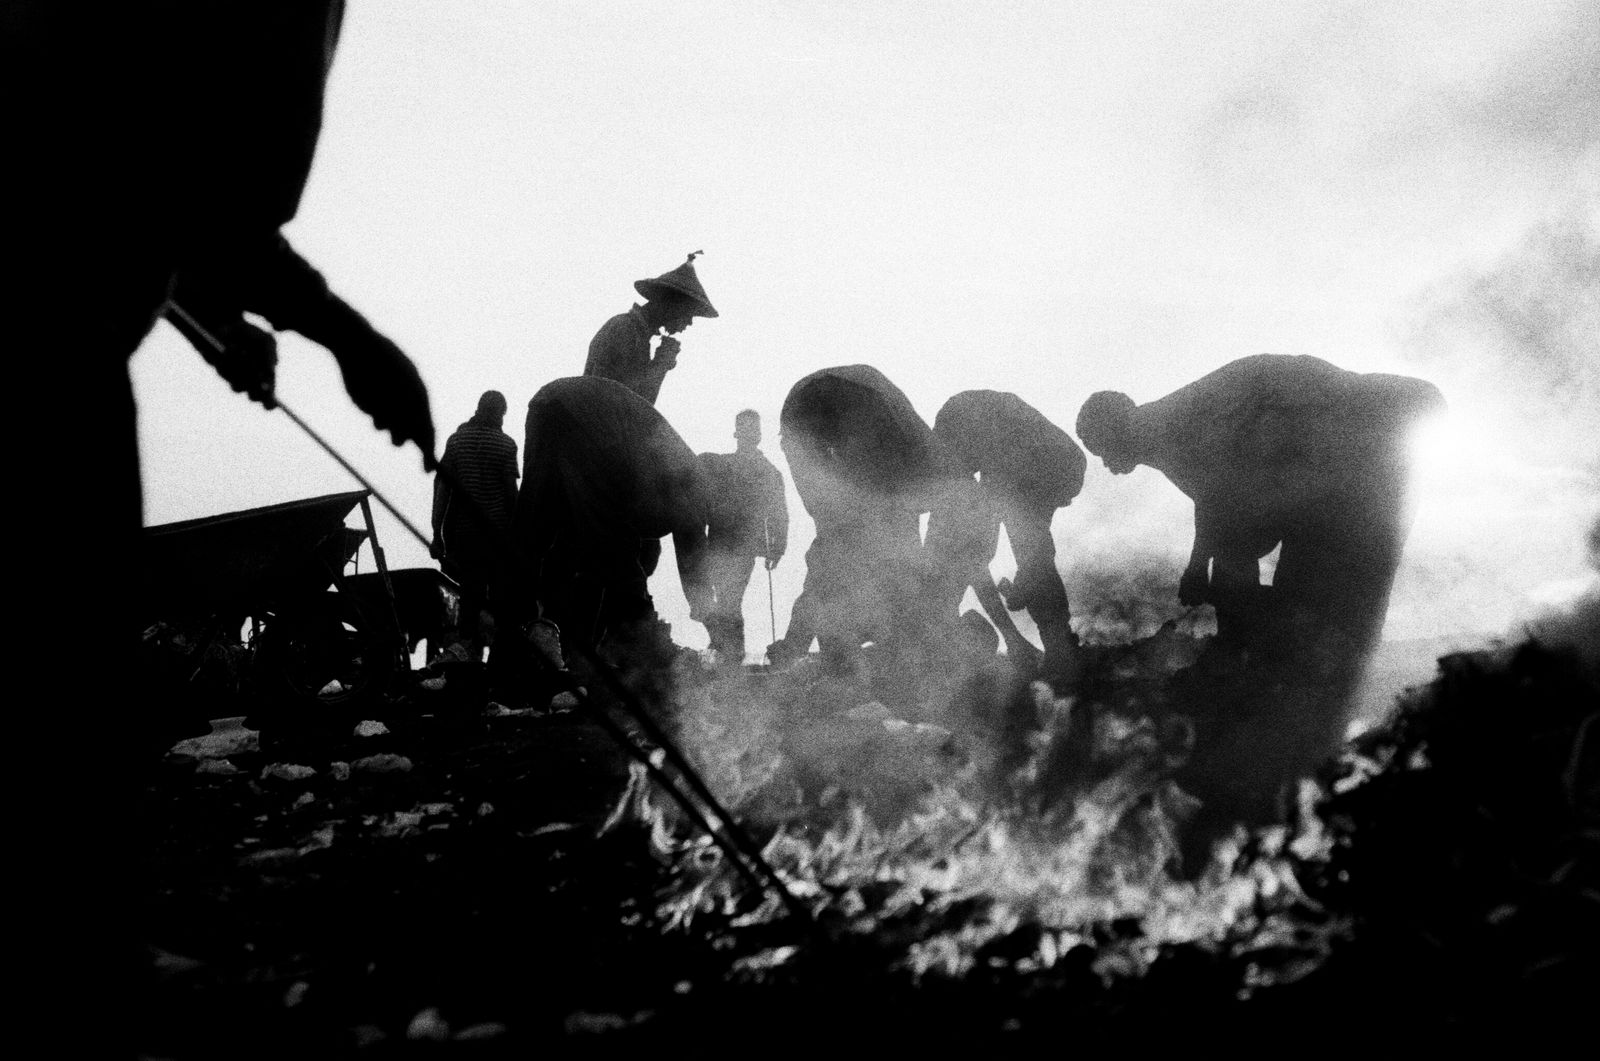 © carolina rapezzi - Accra. Agbogbloshie. A group of workers in the "Kilimanjaro" burning area burning wires and appliances.